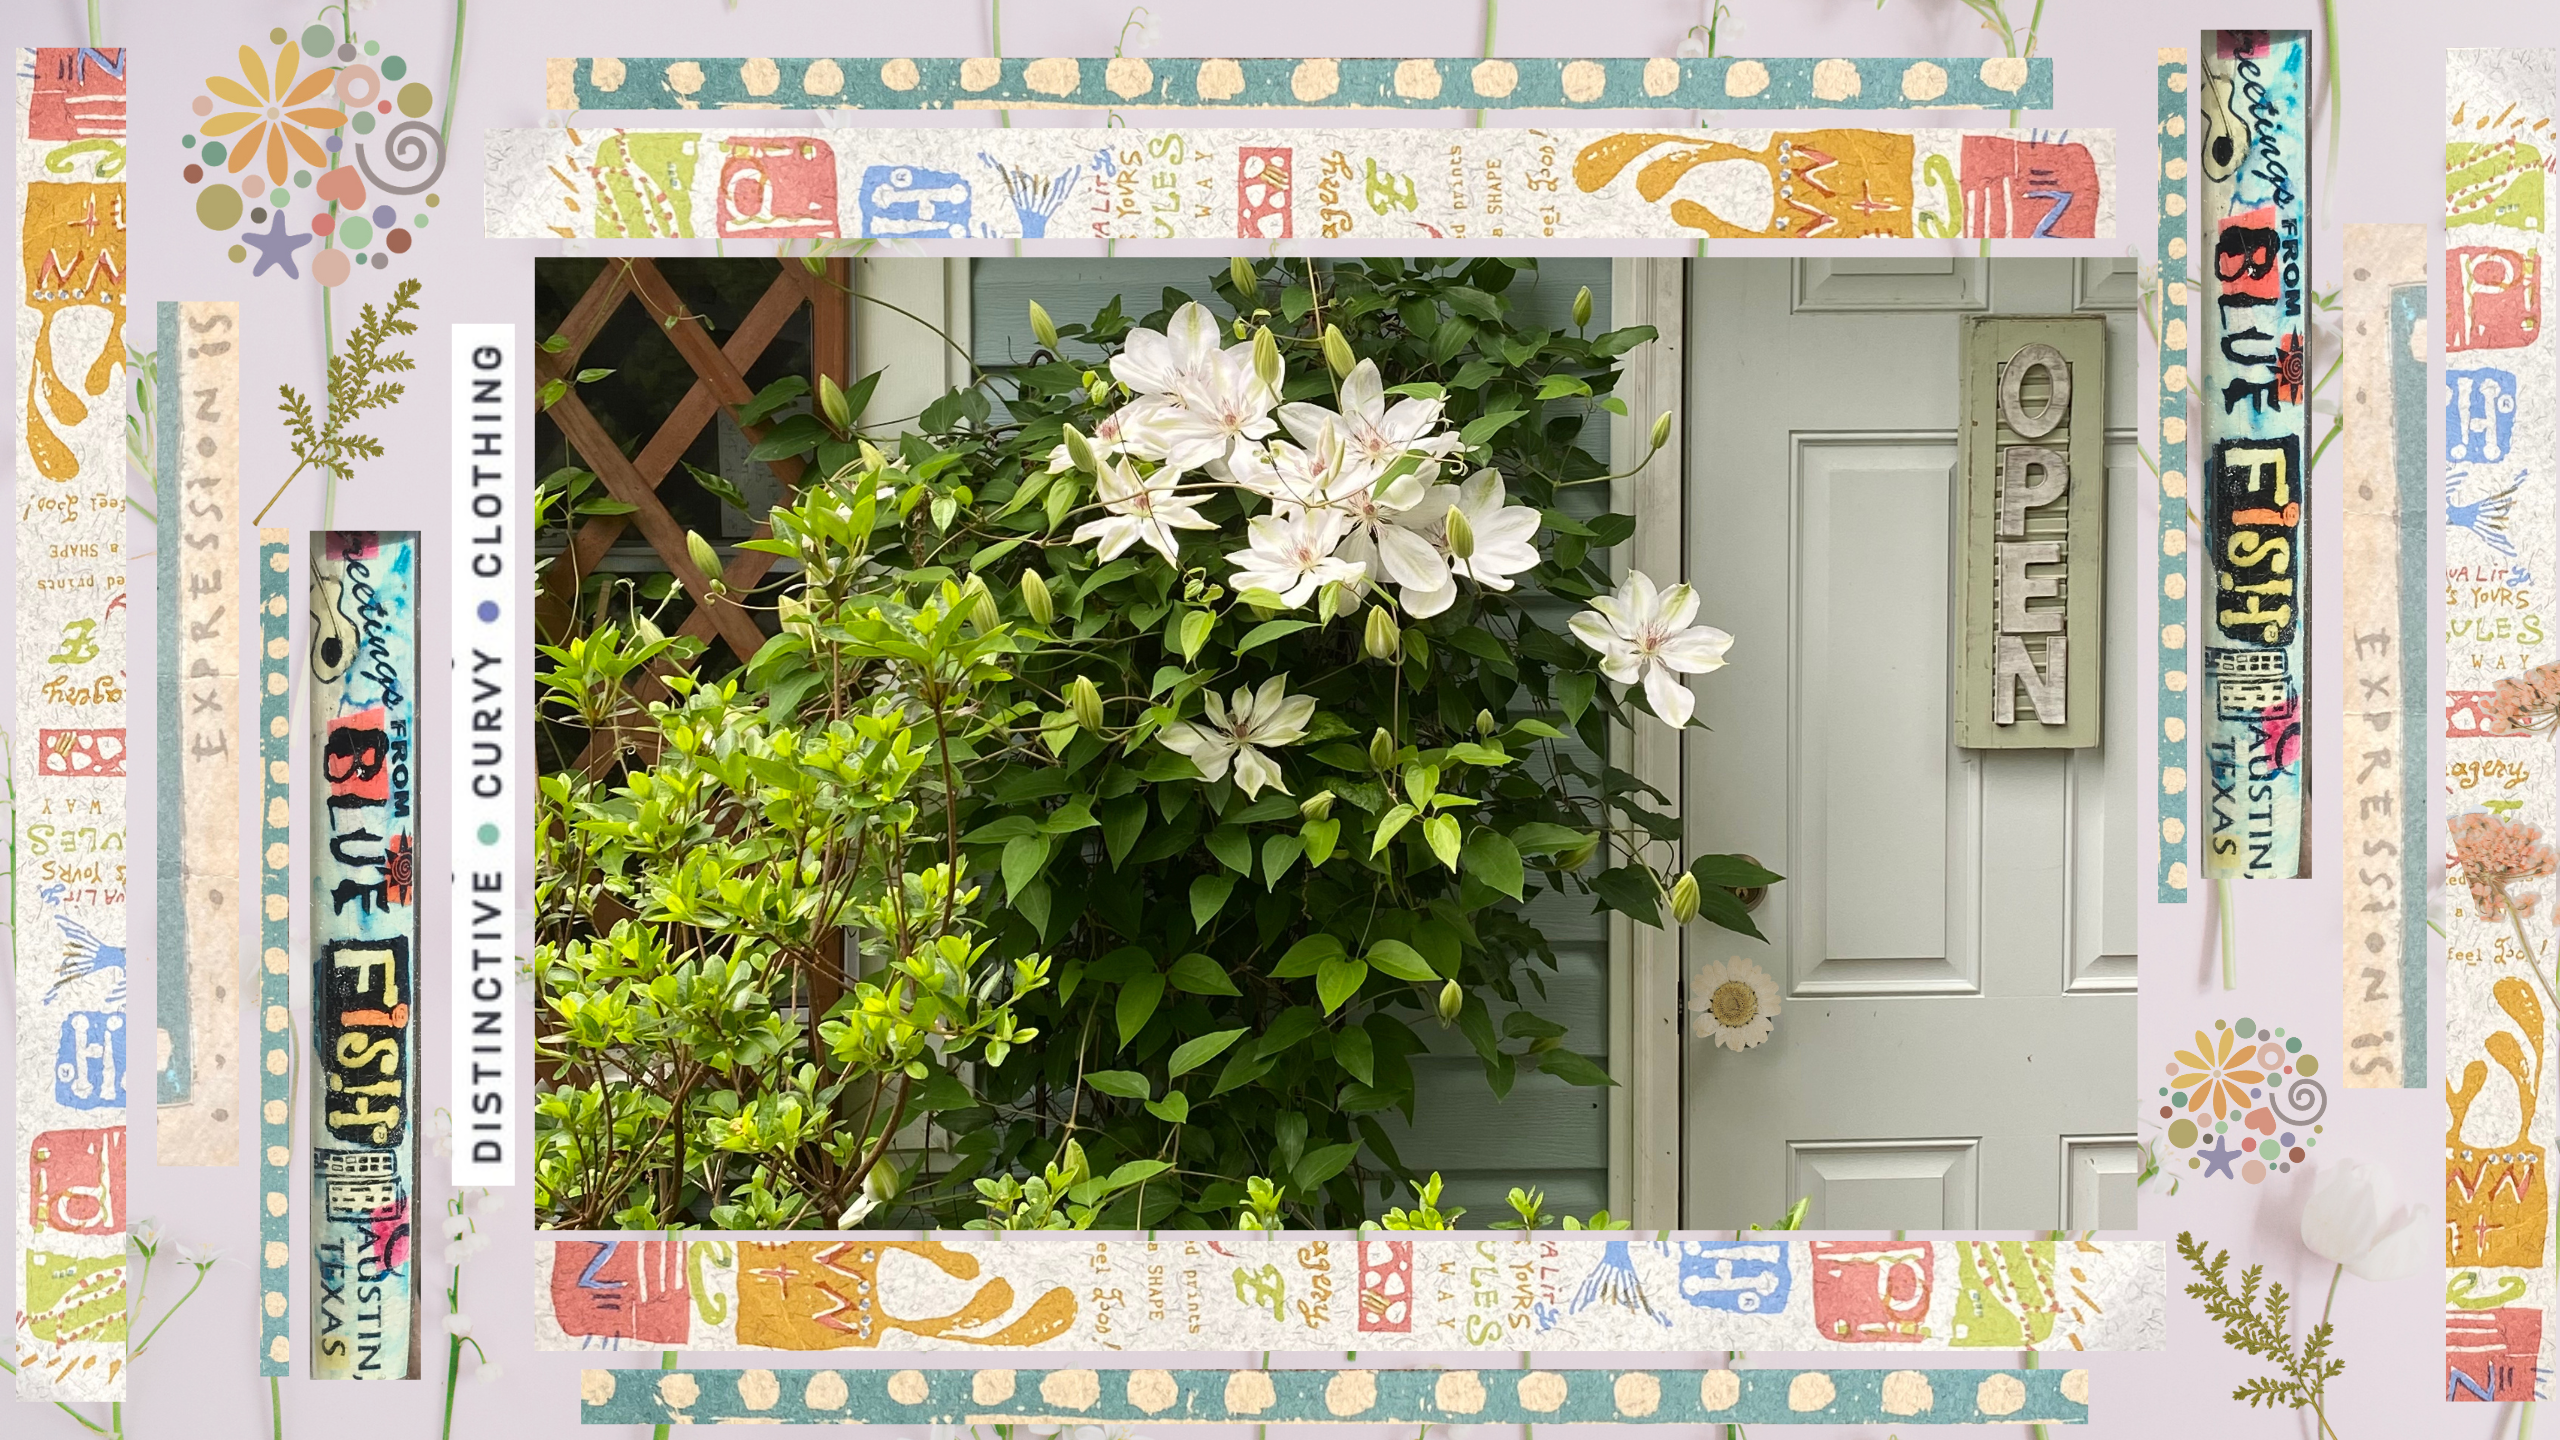 Video Clip in a Rectangle Shape with pastel border and title font welcoming visitors to our site by showing a white door with a daisy knob and gardens all around a small building with a stone pathway